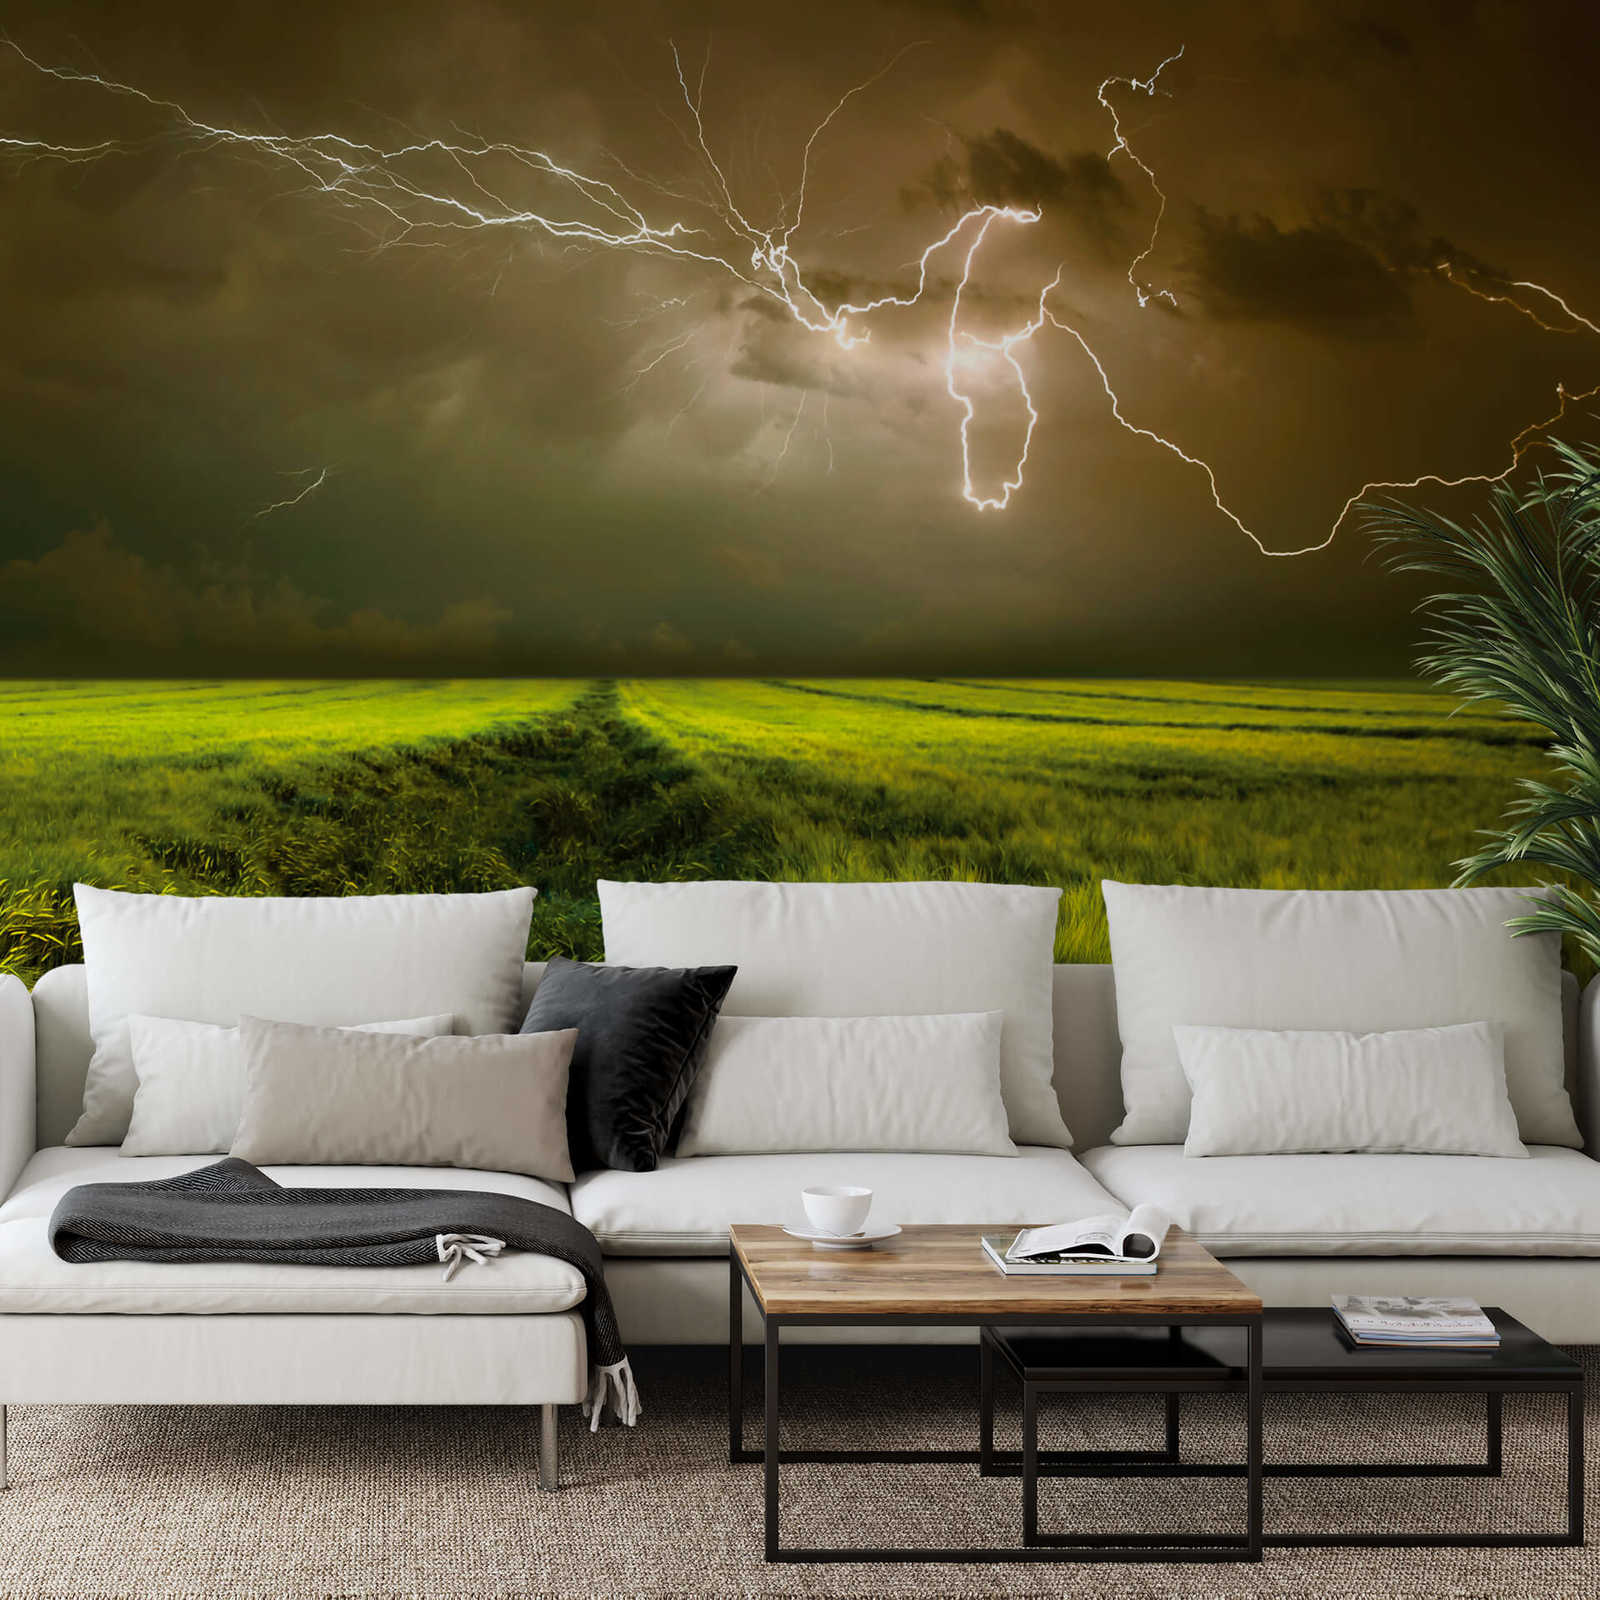             Photo wallpaper Field in storm with lightning - Green, Brown
        